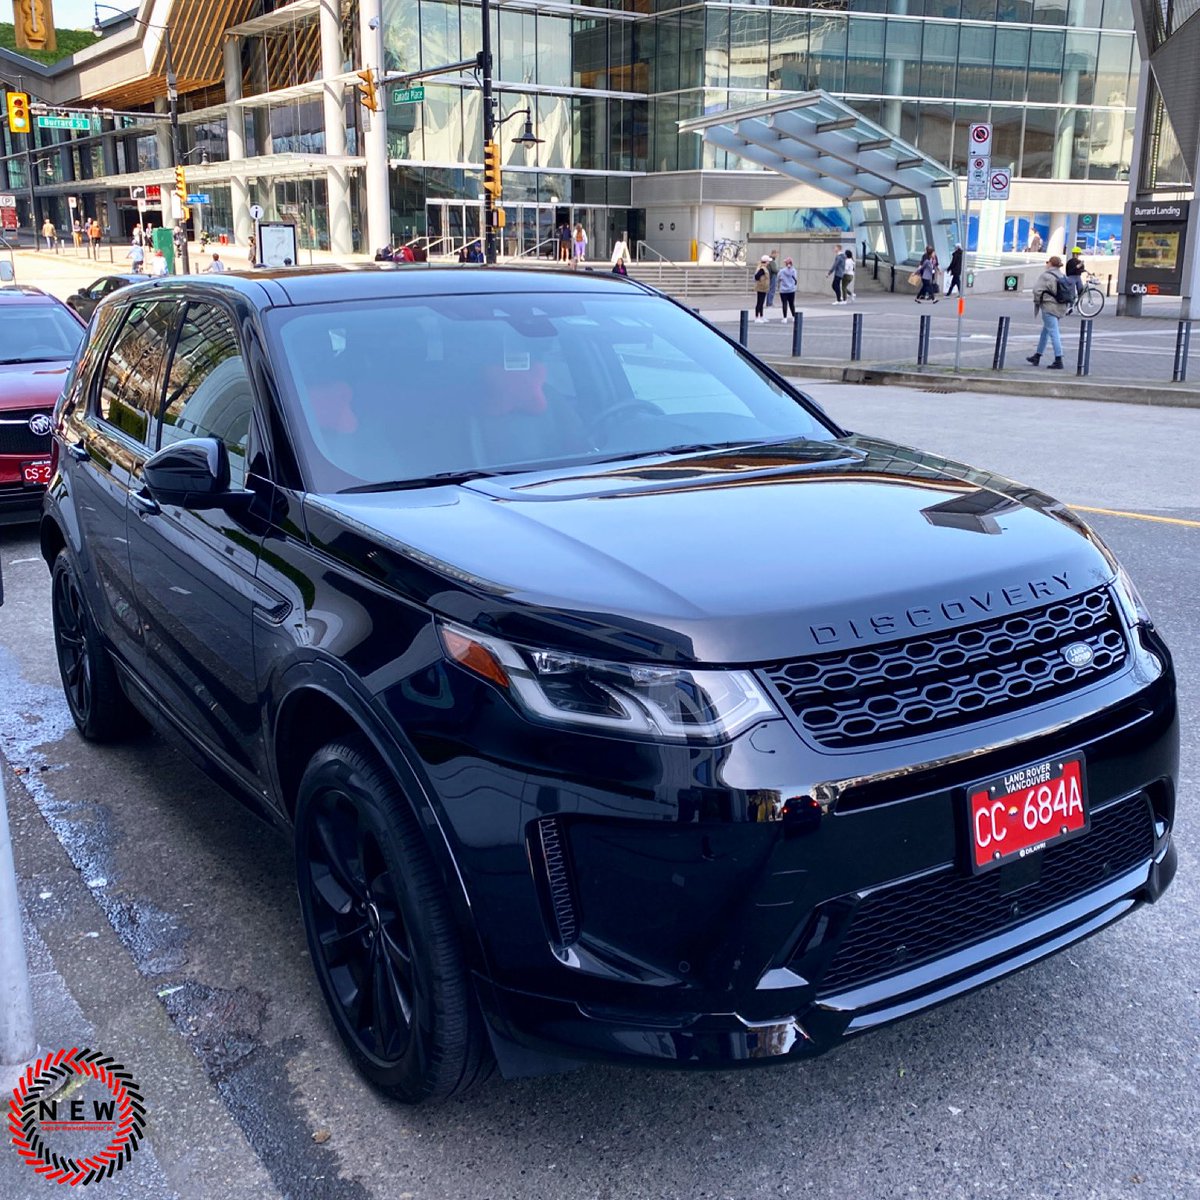 Land Rover Discovery Sport (🇨🇦)

#landrover #landroverdiscoverysport #landroverdiscoveryclub #landrovergram #carsofnewwest #carsofnewwestminster #carsofvancouver #carsofwongchukhang #carsofinstagram #cargram #carspotting #instacars #luxurysuv #suv